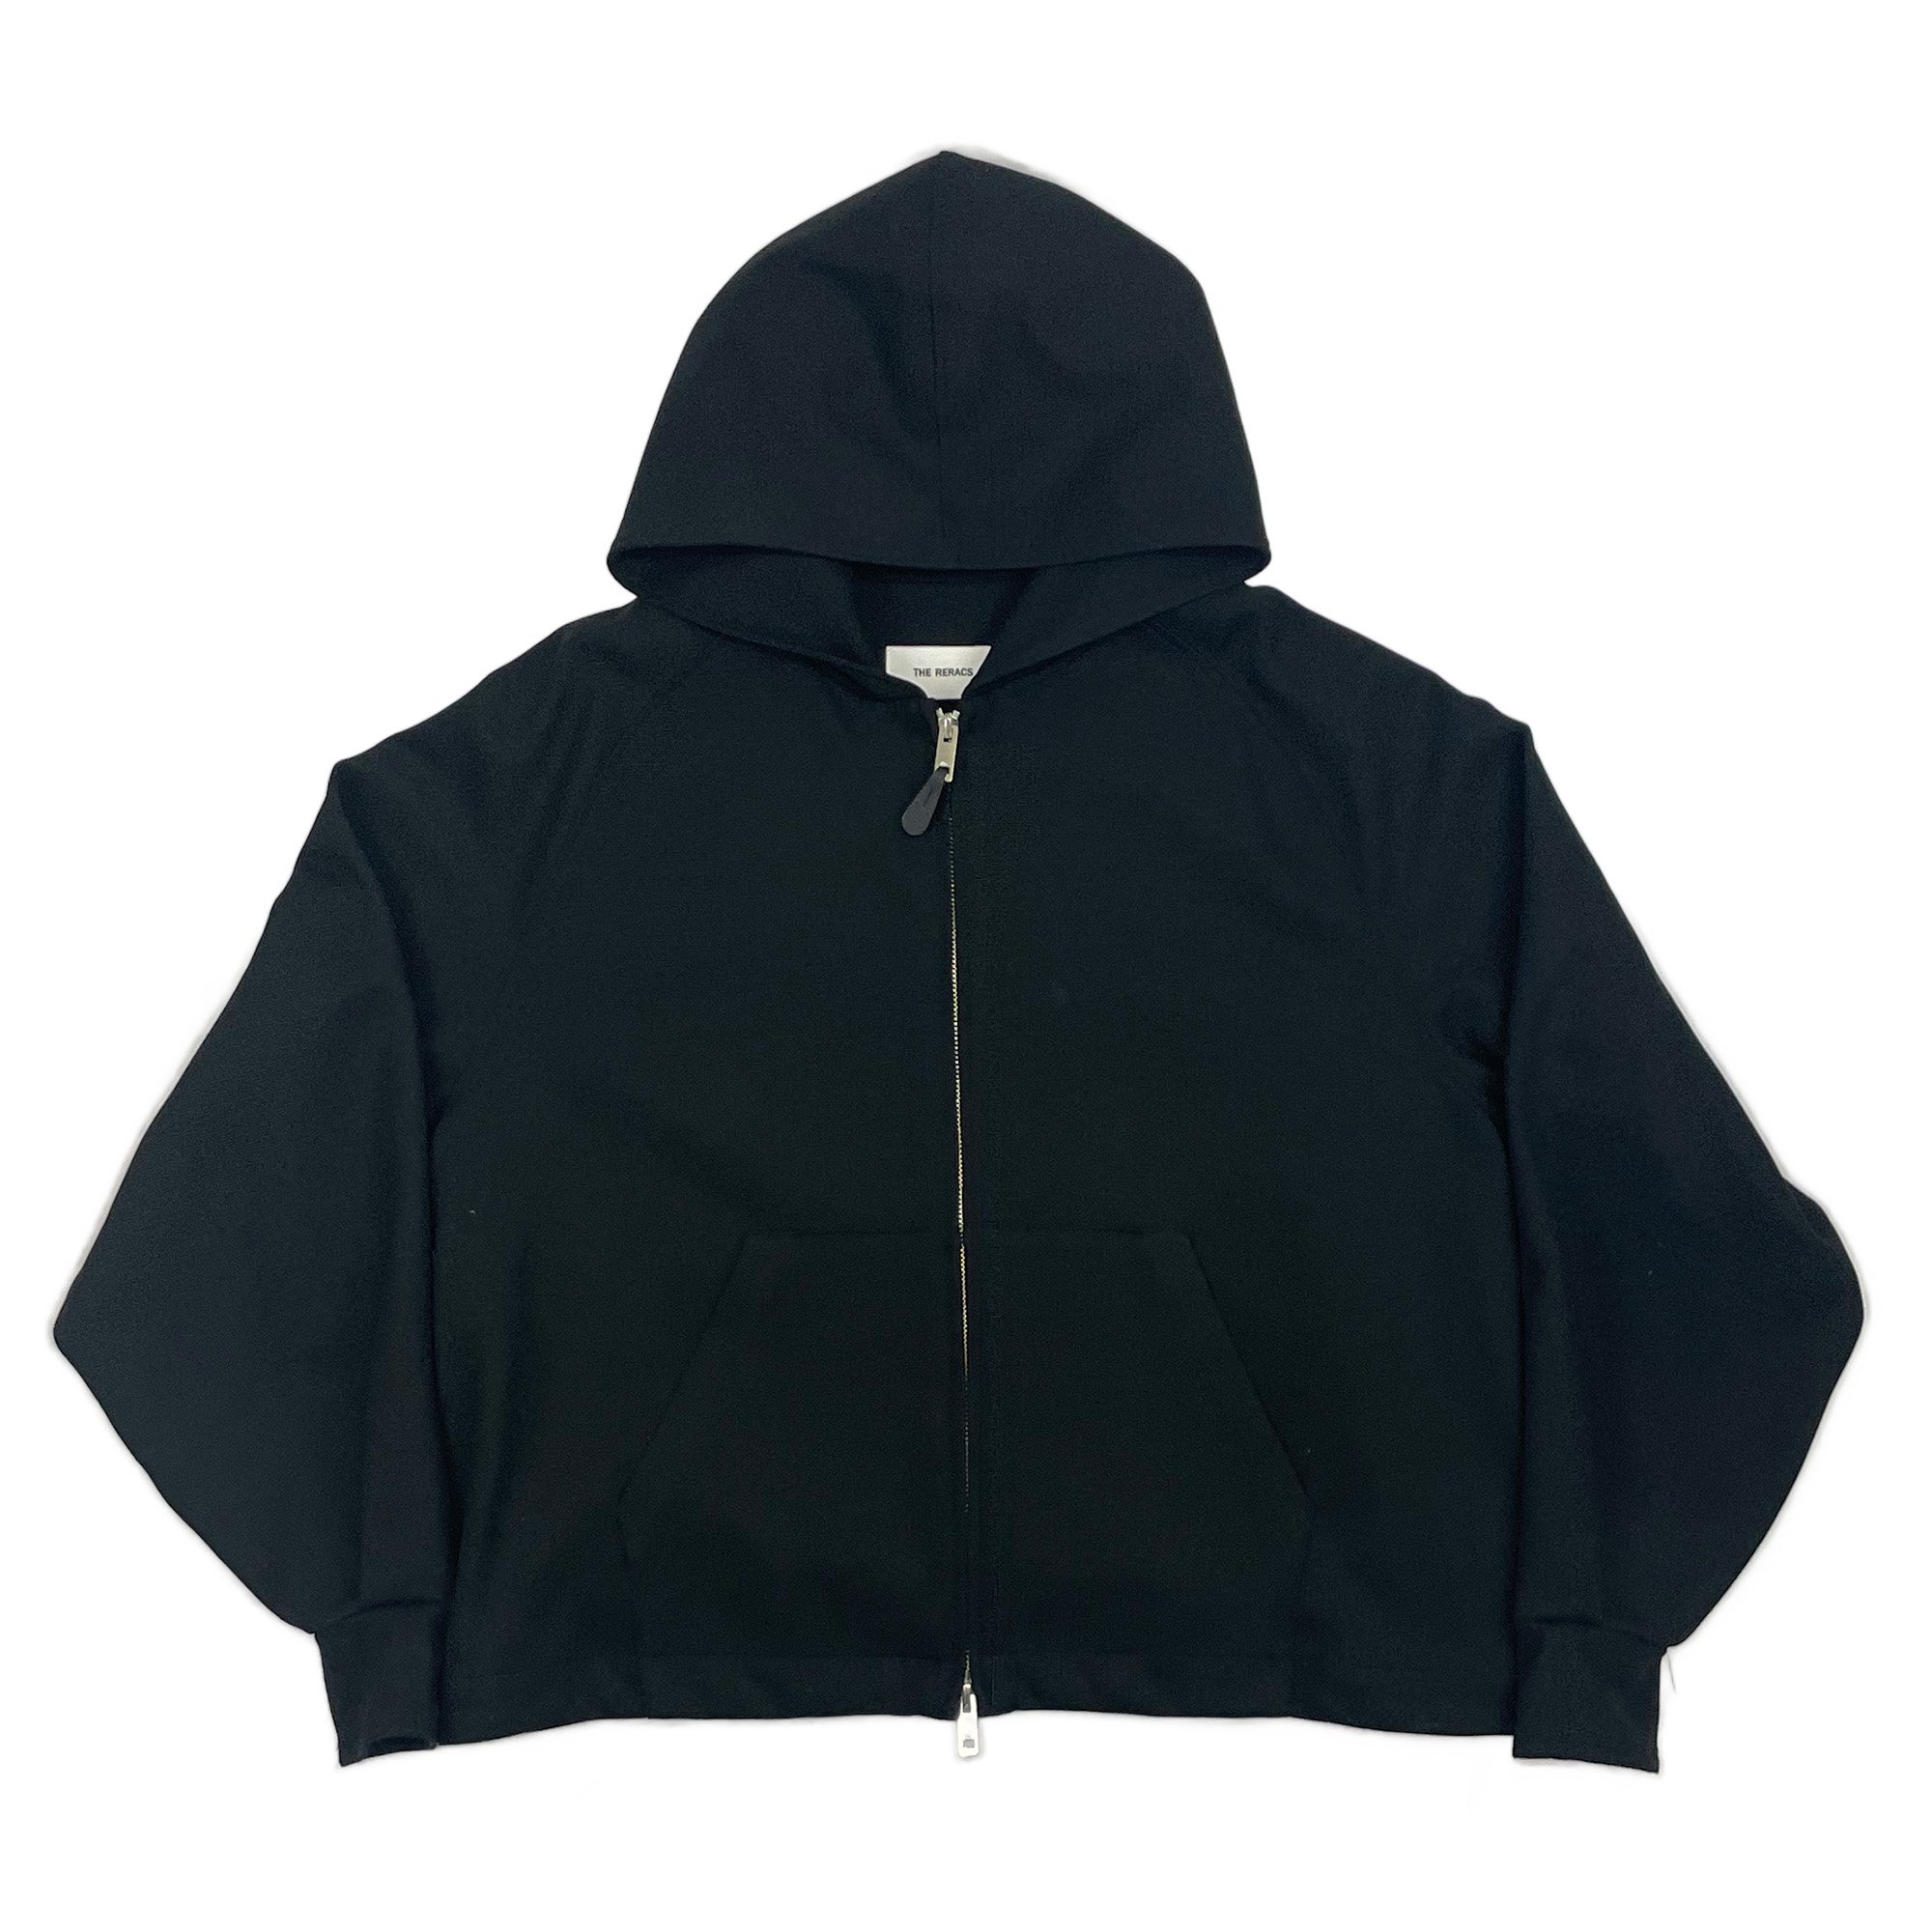 <img class='new_mark_img1' src='https://img.shop-pro.jp/img/new/icons7.gif' style='border:none;display:inline;margin:0px;padding:0px;width:auto;' />THE RERACS THERMAL DOUBLE FACE ZIP UP PARKA